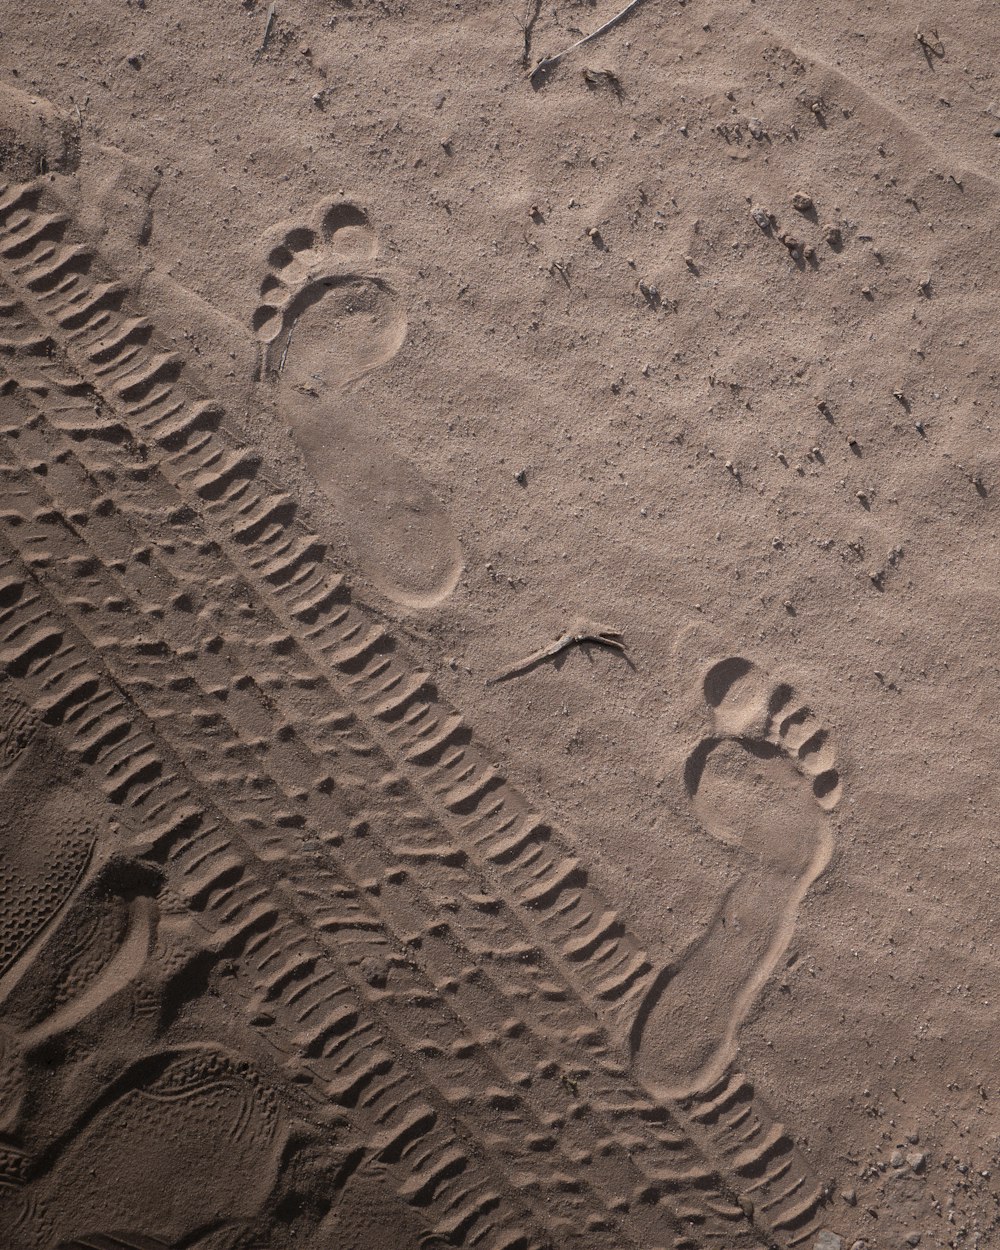 foot prints in the sand